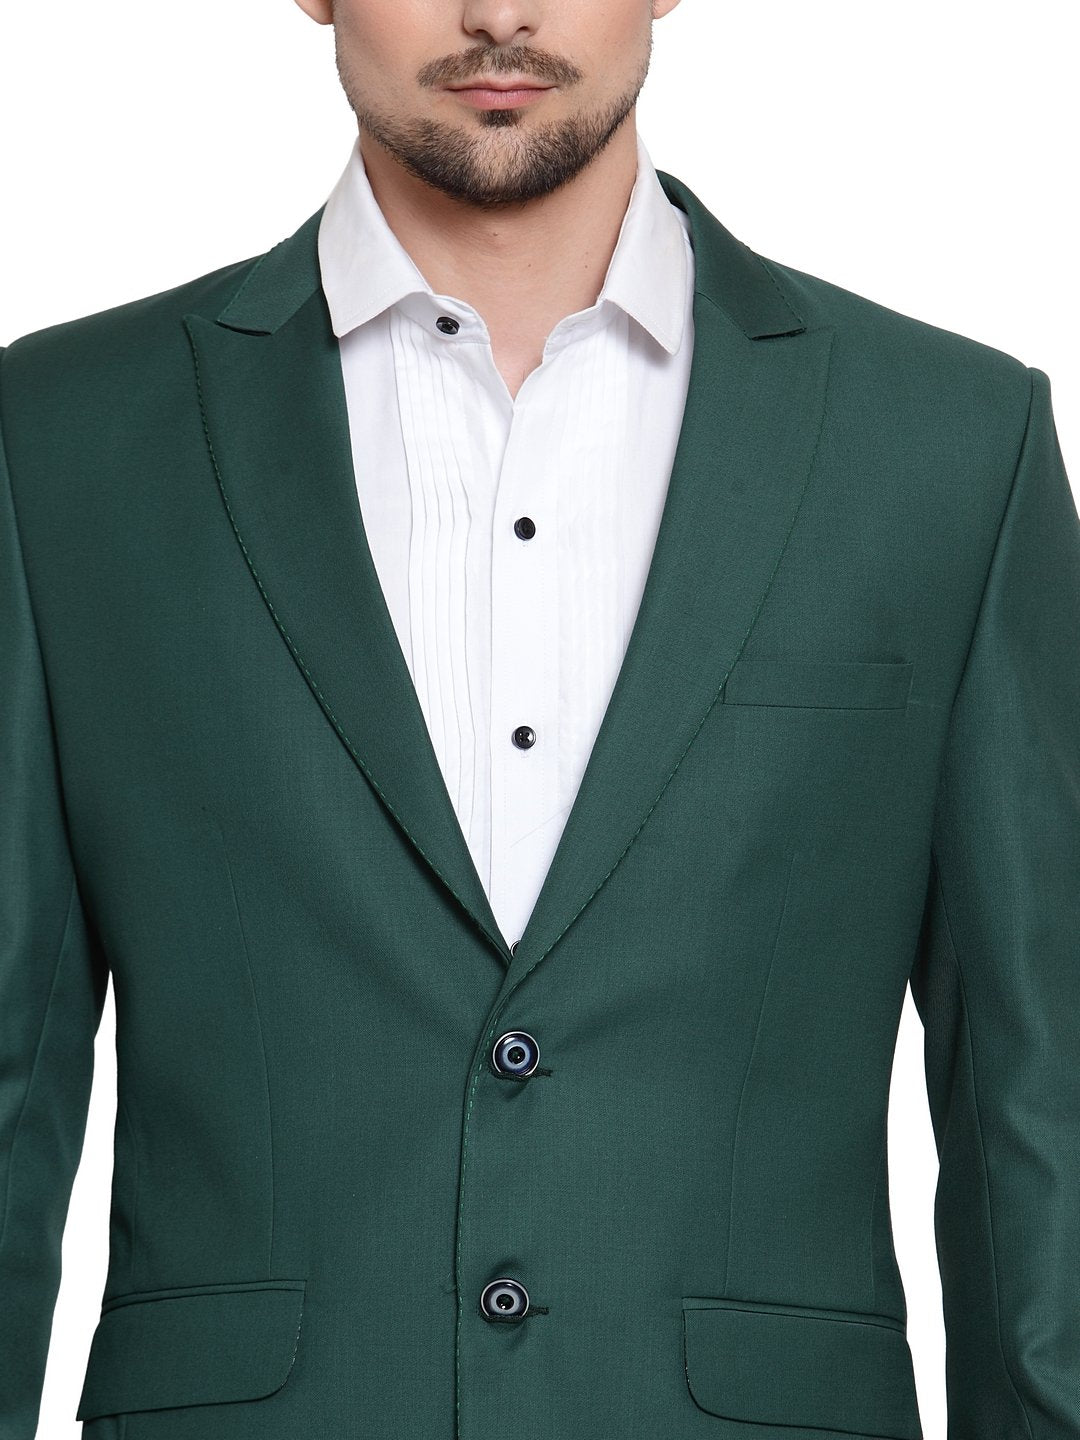 BOTTLE GREEN SUIT | Mayo Clothier